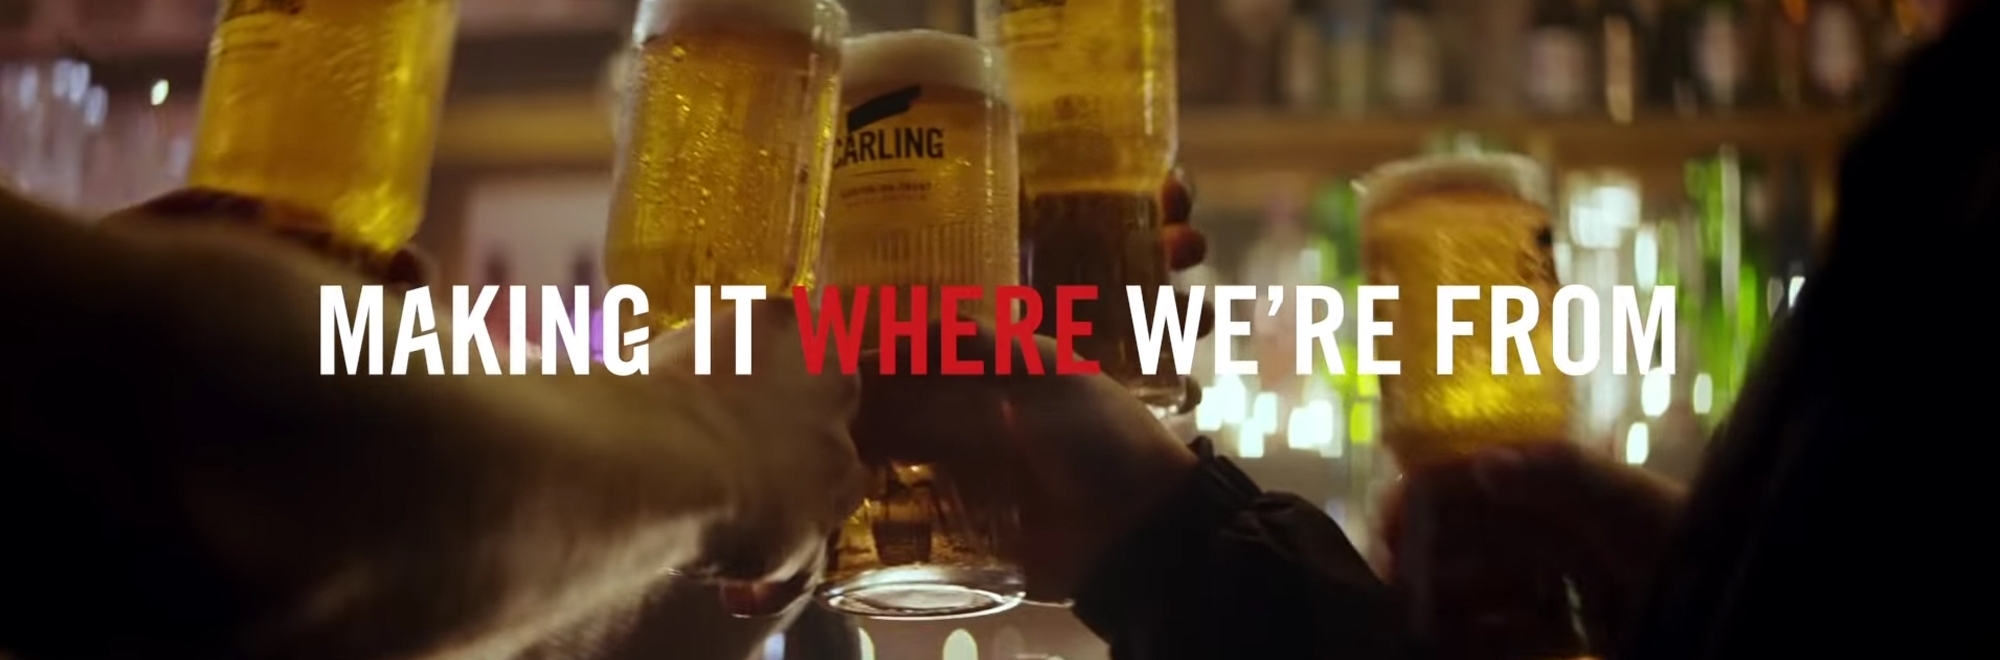 Carling returns to its hometown to tell the story behind its lager